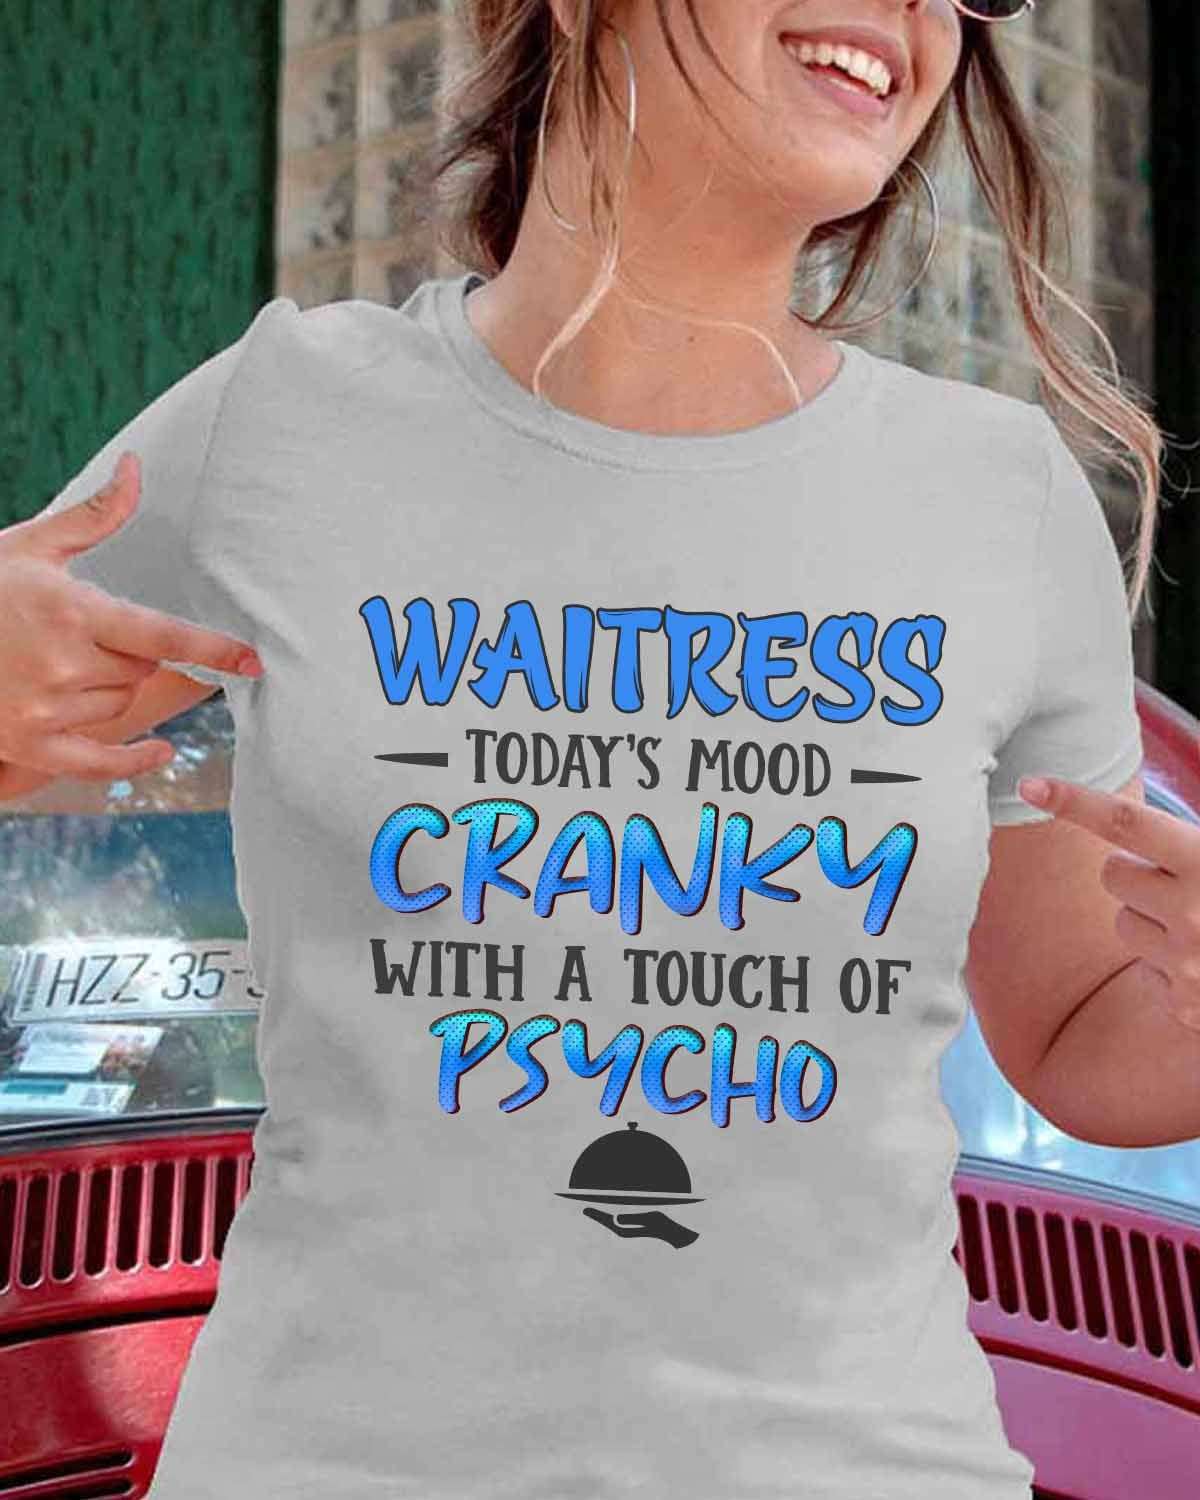 Waitress today's mood cranky with a touch of psycho